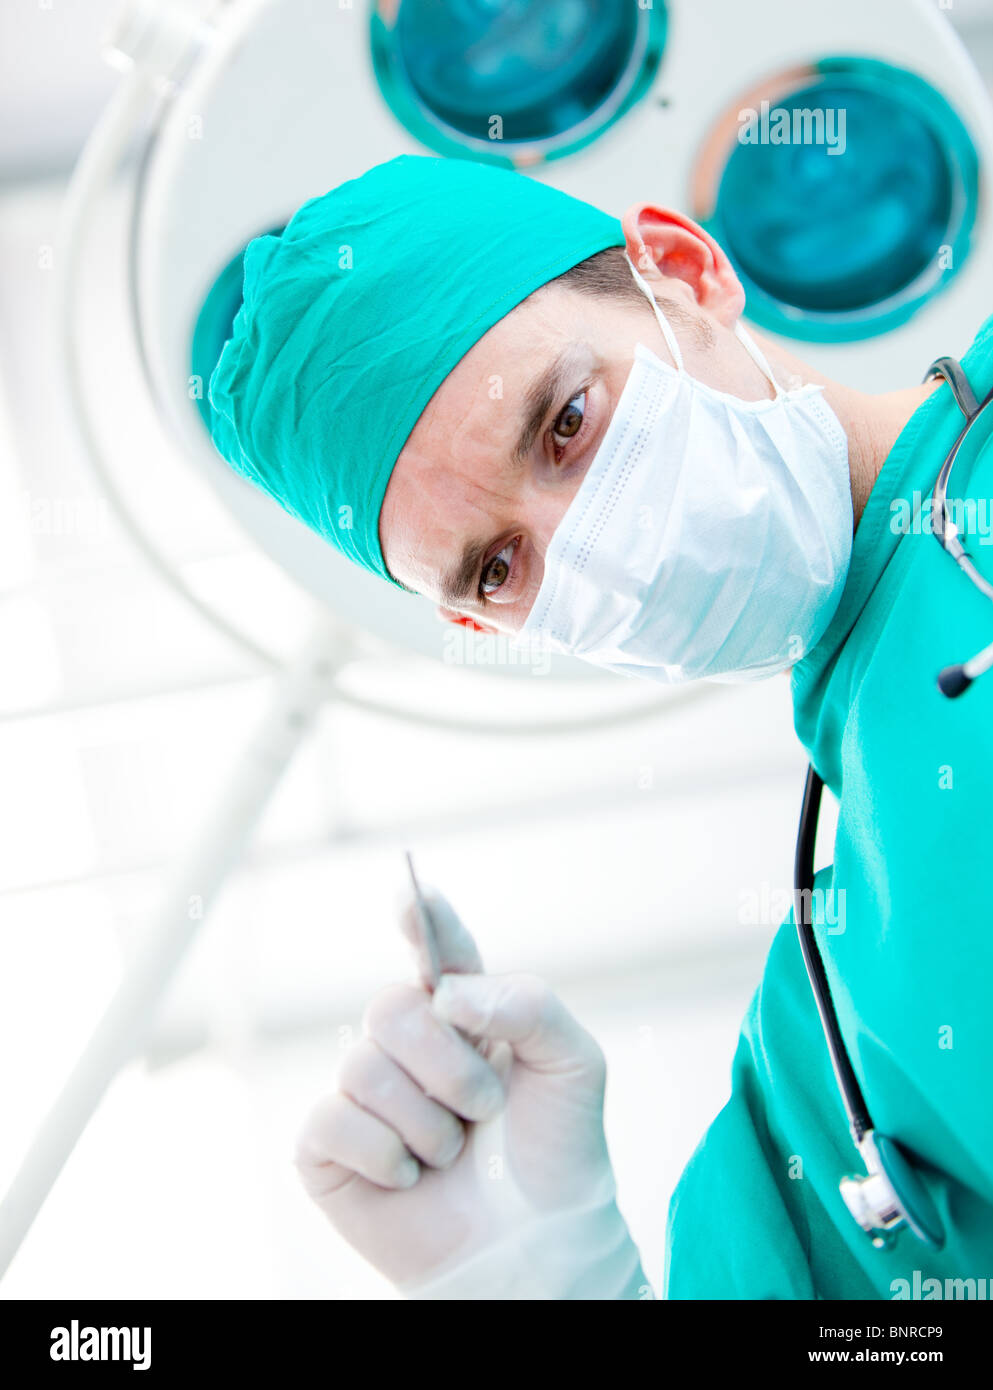 Concentrated surgeon during an operation Stock Photo